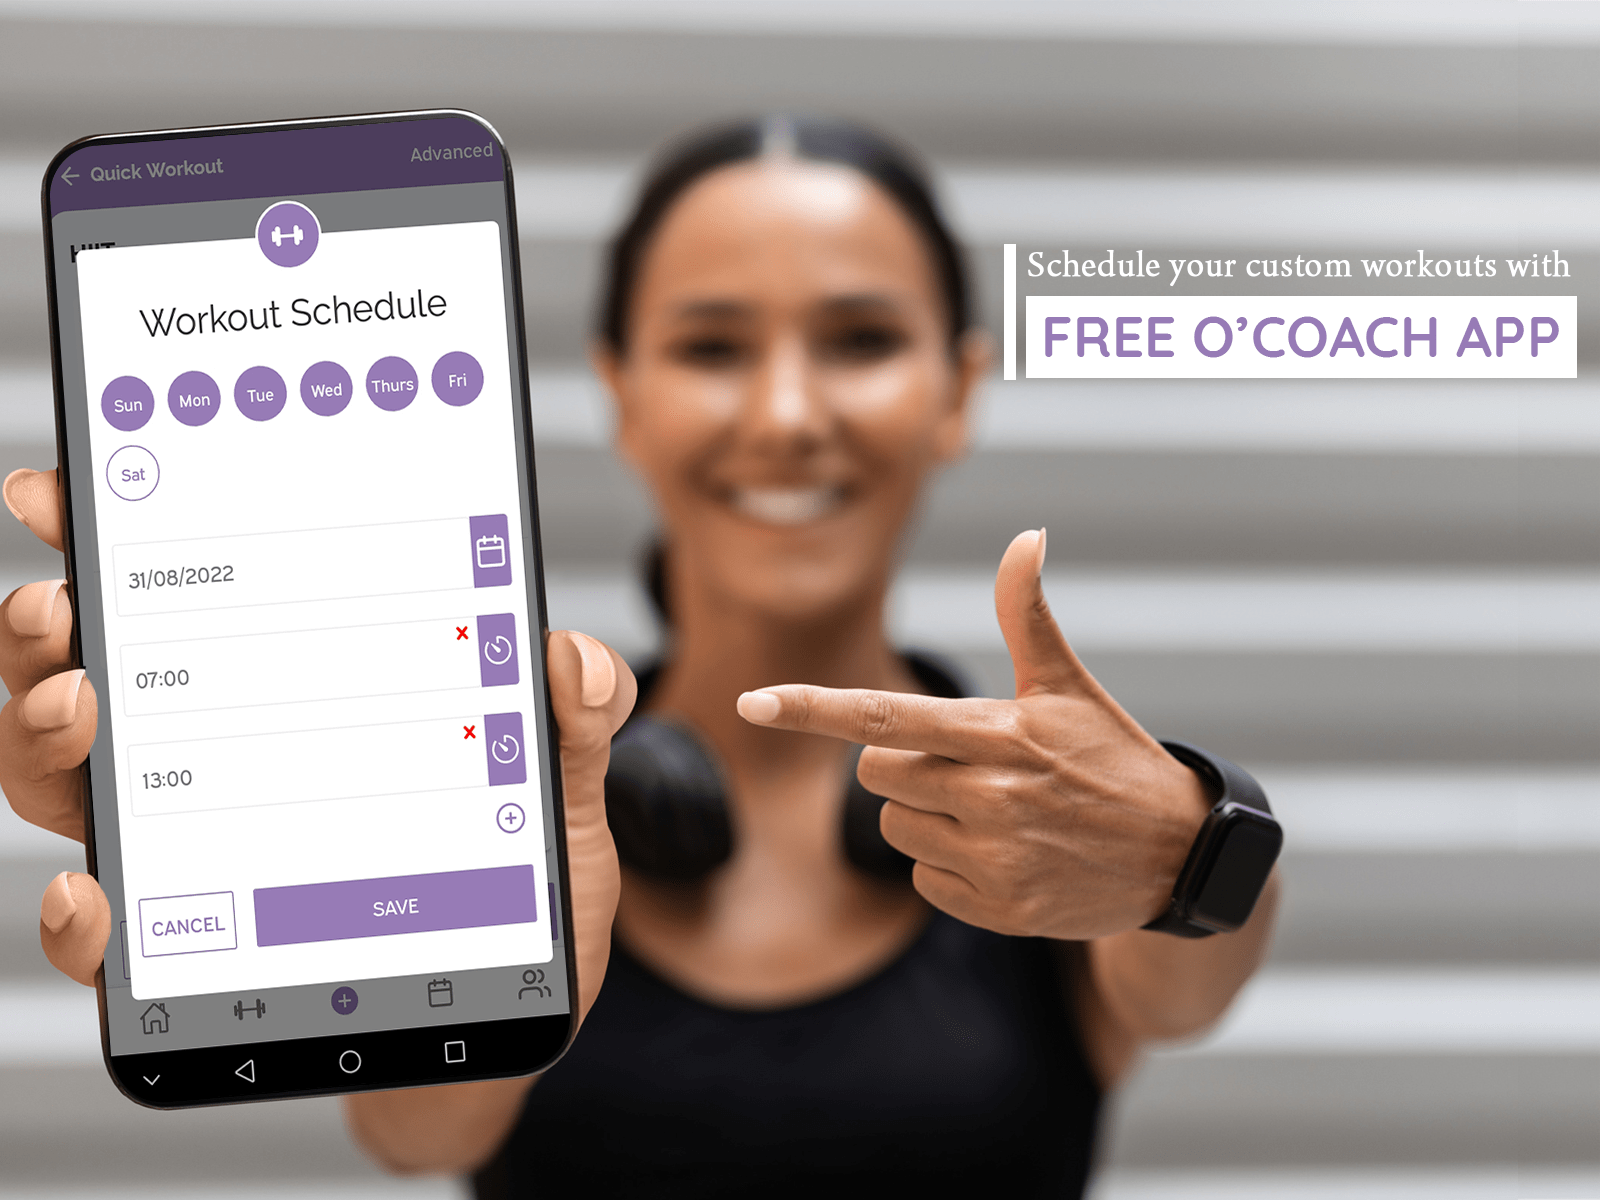 Create and schedule your rehabilitation workout using O'Coach fitness app